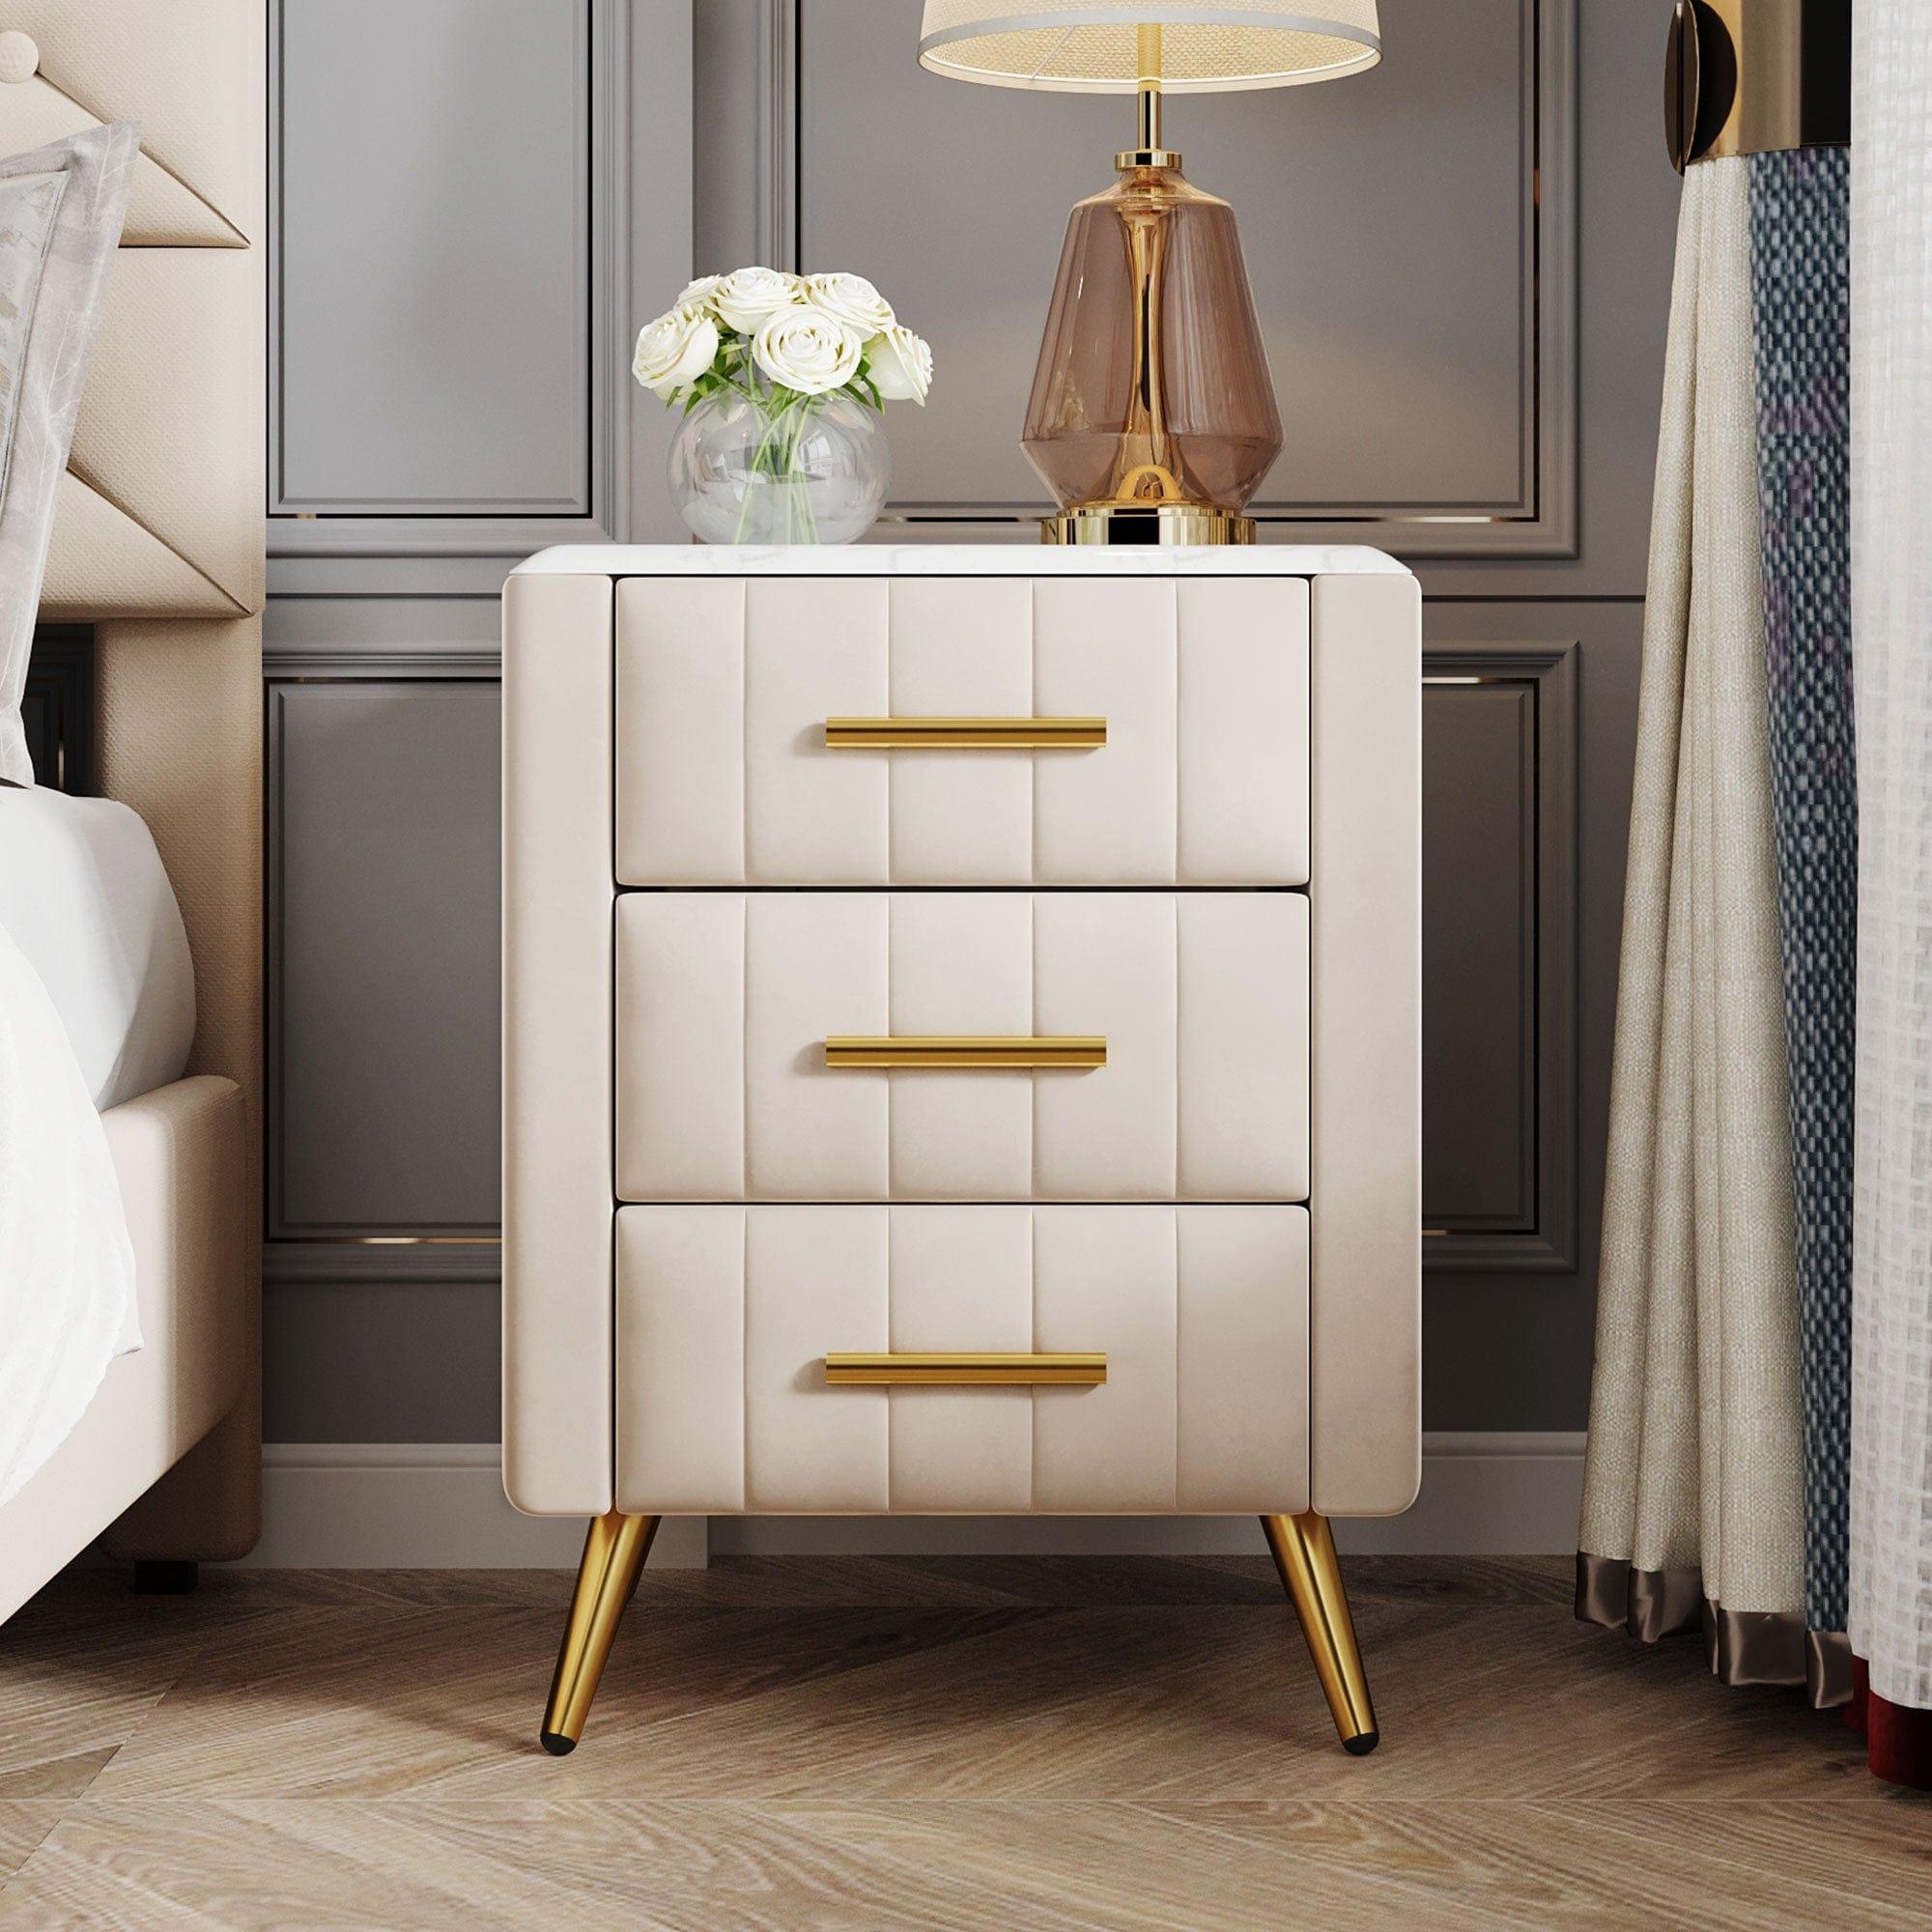 Shop Upholstered Wooden Nightstand with 3 Drawers and Metal Legs&Handles,Fully Assembled Except Legs&Handles,Bedside Table with Marbling Worktop - Beige Mademoiselle Home Decor